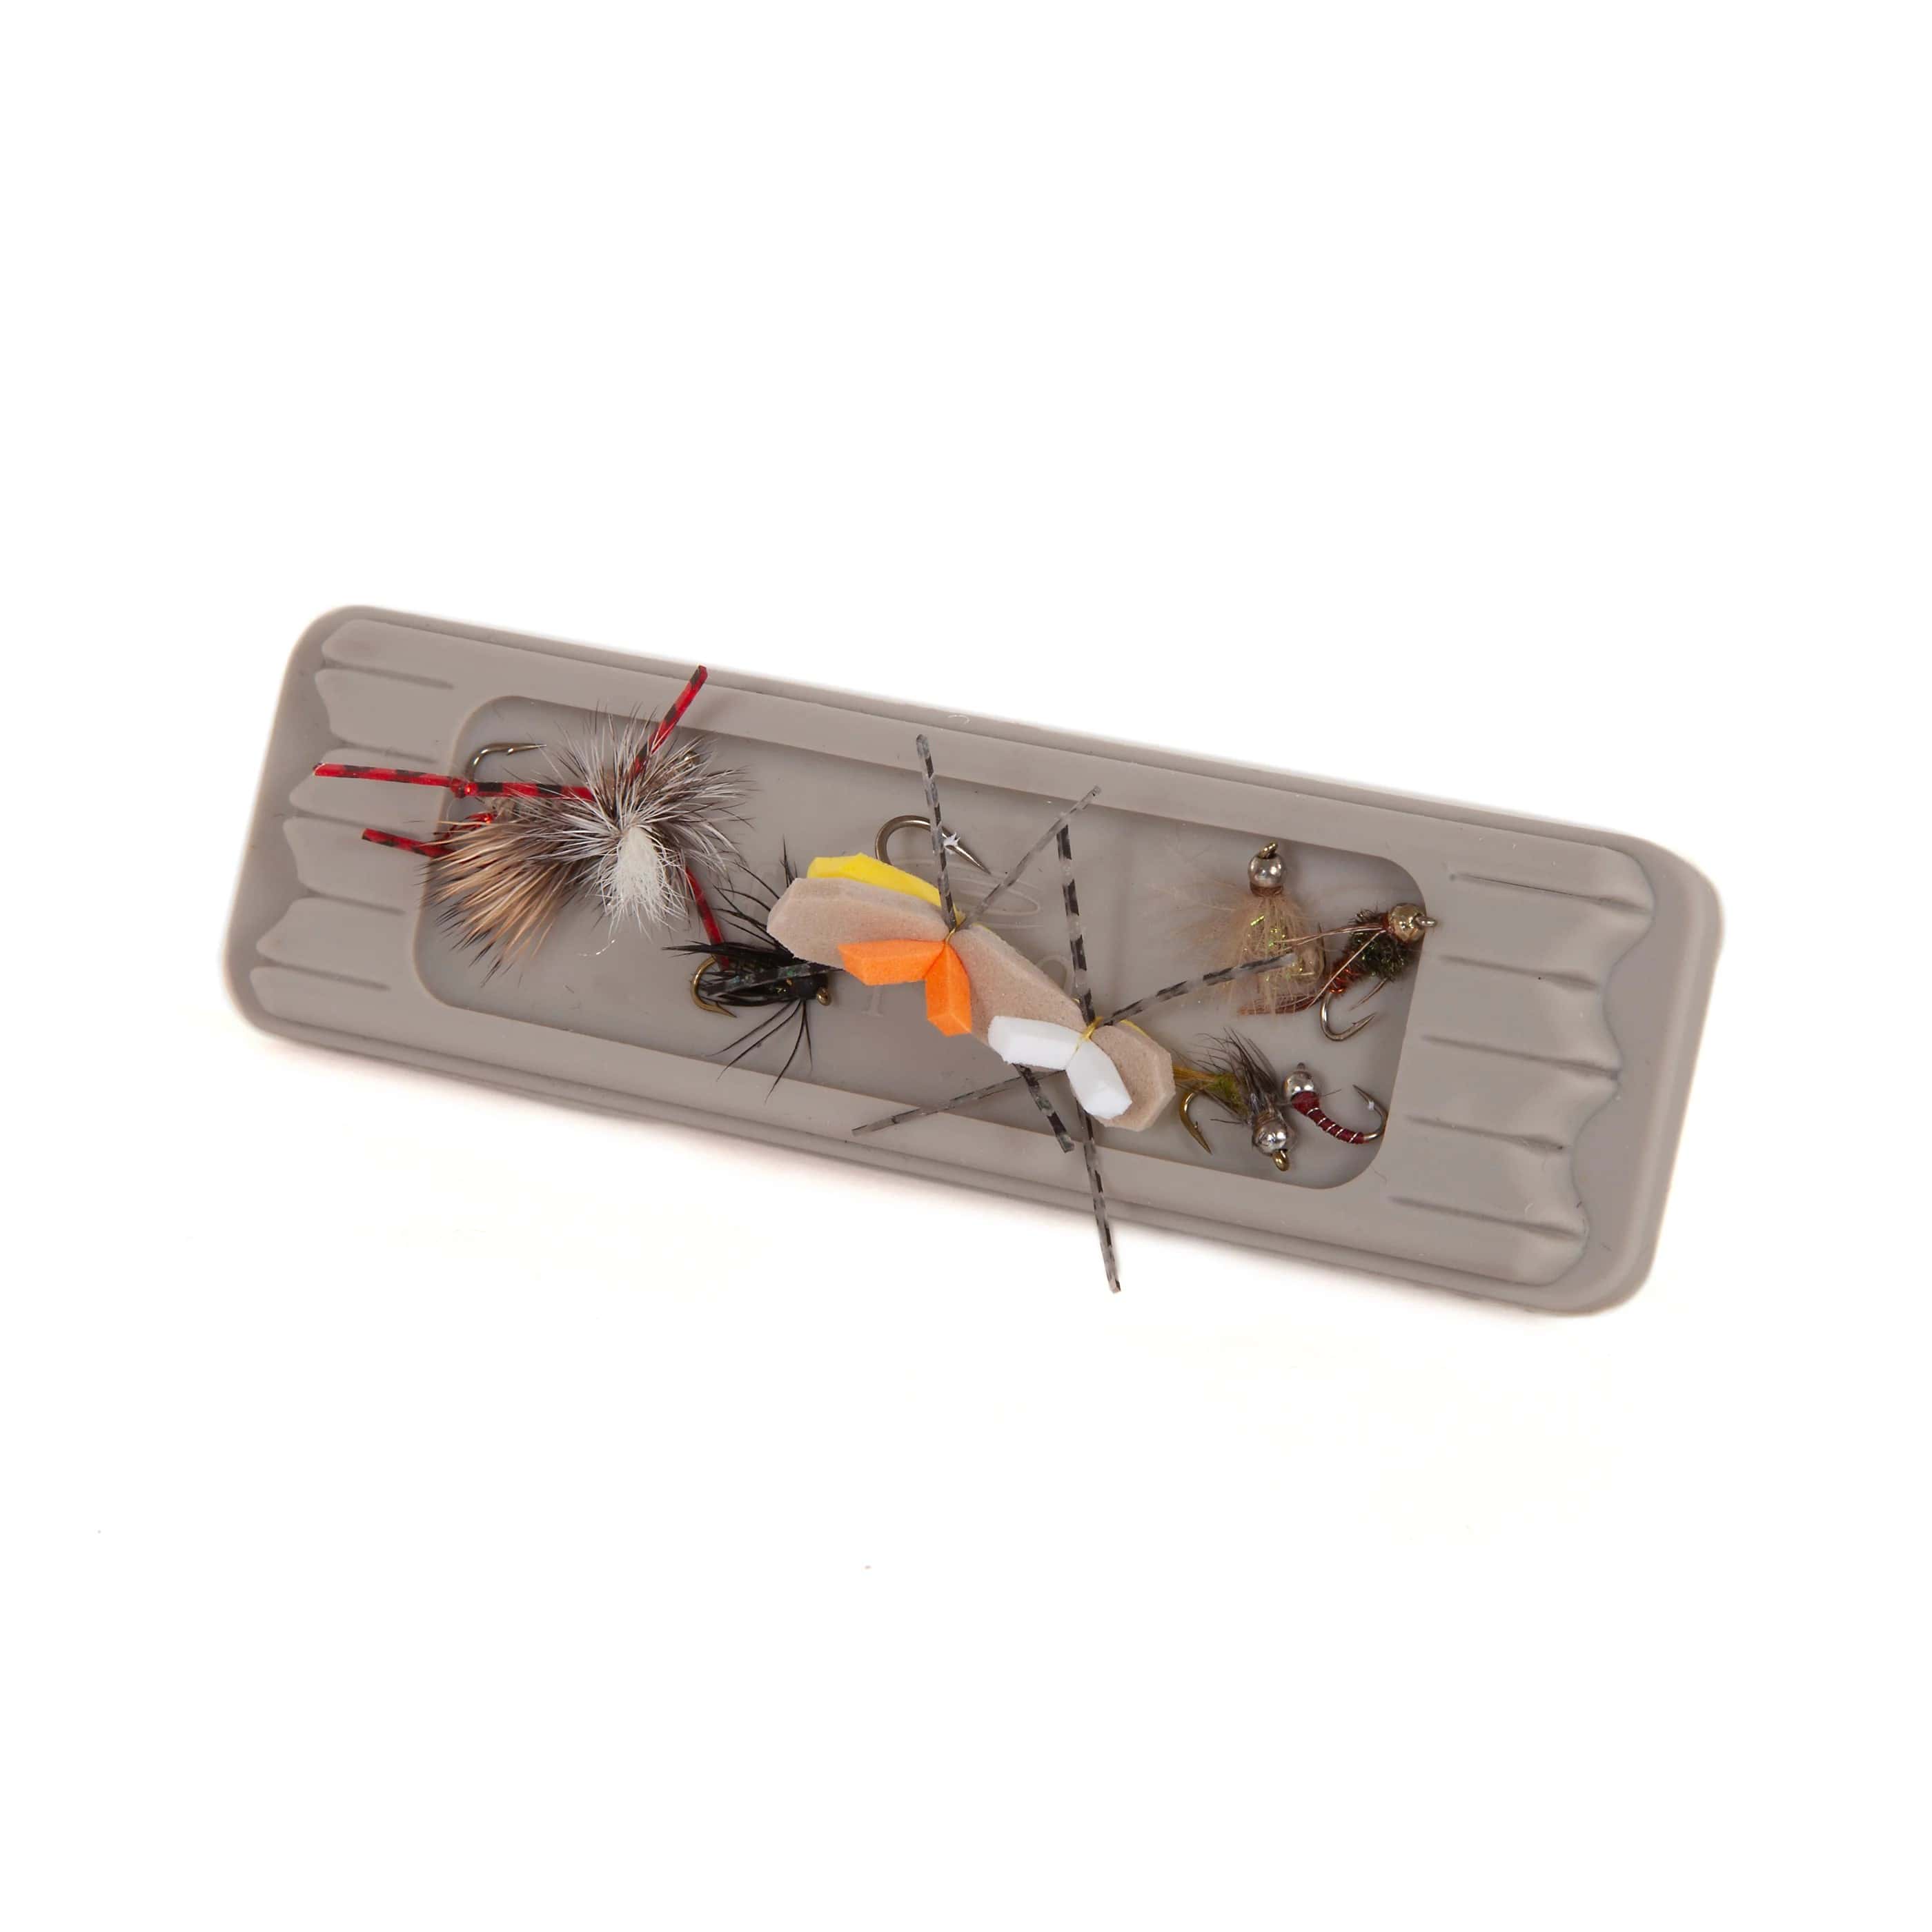 Fishpond Tacky Fly Dock MagPad  Magnetic Fly Fishing Patch Fly Holder -  basin + bend